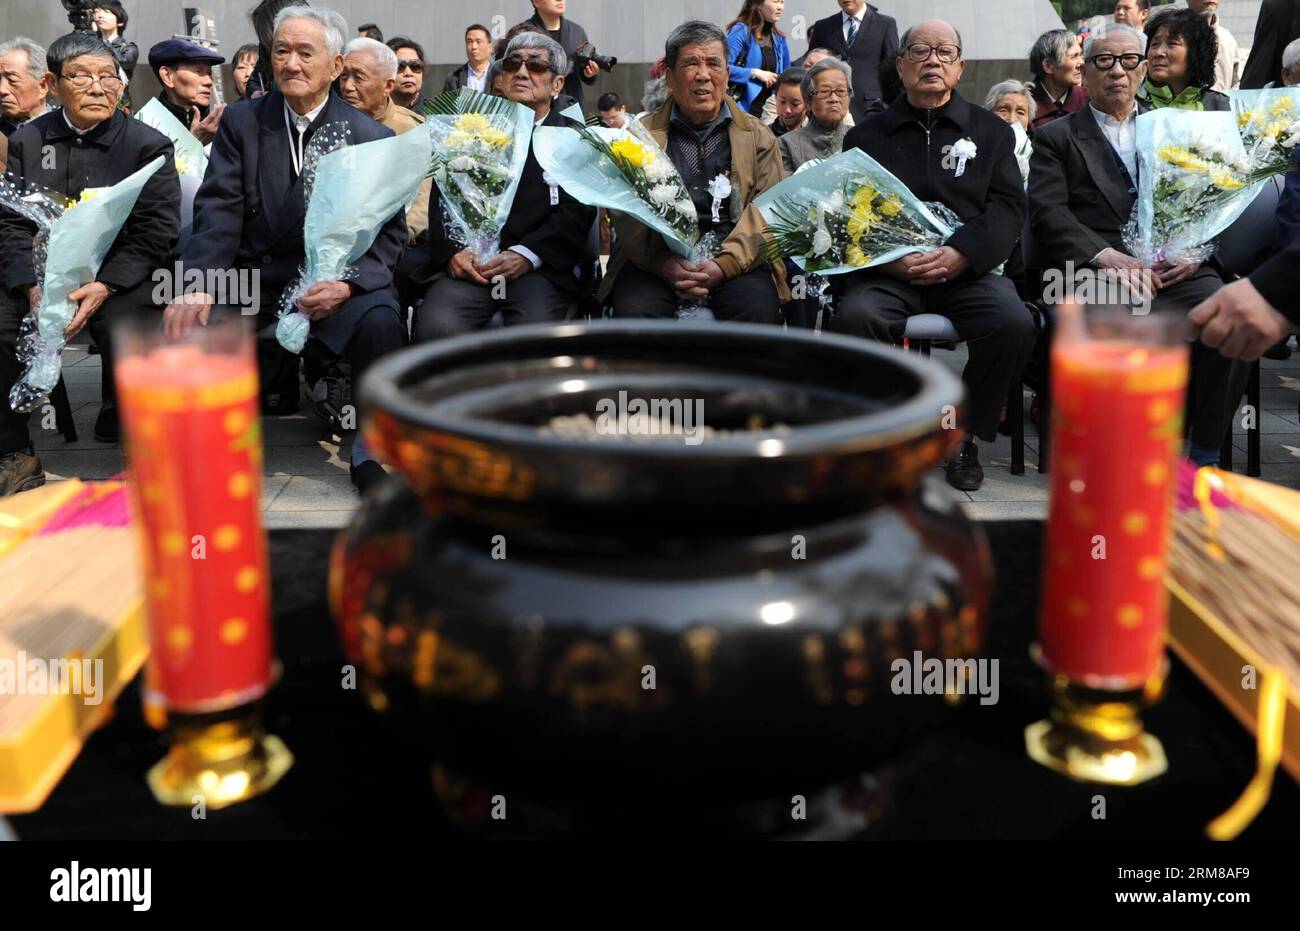 (140405) -- NANJING, April 5, 2014 (Xinhua) -- Survivors and family members of the victims of the Nanjing Massacre in 1937 mourn for the deceased during a memorial ceremony in the Memorial Hall of the Victims in Nanjing Massacre by Japanese Invaders, in Nanjing, capital of east China s Jiangsu Province, April 5, 2014, also the Qingming Festival, or the Tomb-Sweeping Day. Lots of citizens came here to mourn Nanjing Massacre victims on Saturday. (Xinhua/Han Yuqing) (wf) CHINA-NANJING-QINGMING FESTIVAL-NANJING MASSACRE-MEMORIAL CEREMONY (CN) PUBLICATIONxNOTxINxCHN   Nanjing April 5 2014 XINHUA Su Stock Photo